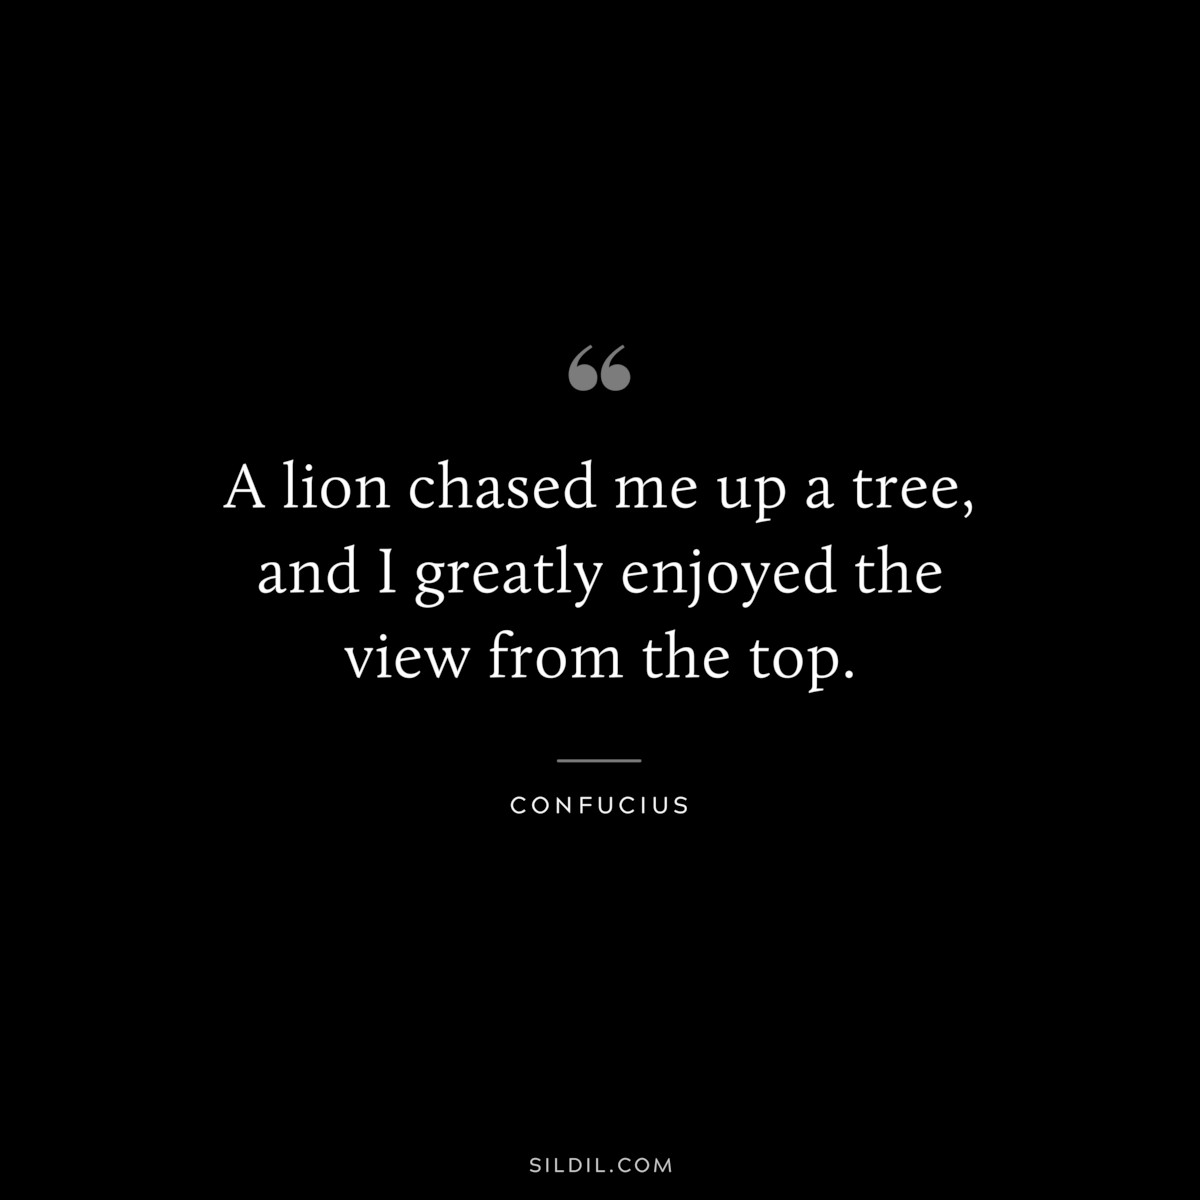 A lion chased me up a tree, and I greatly enjoyed the view from the top. ― Confucius